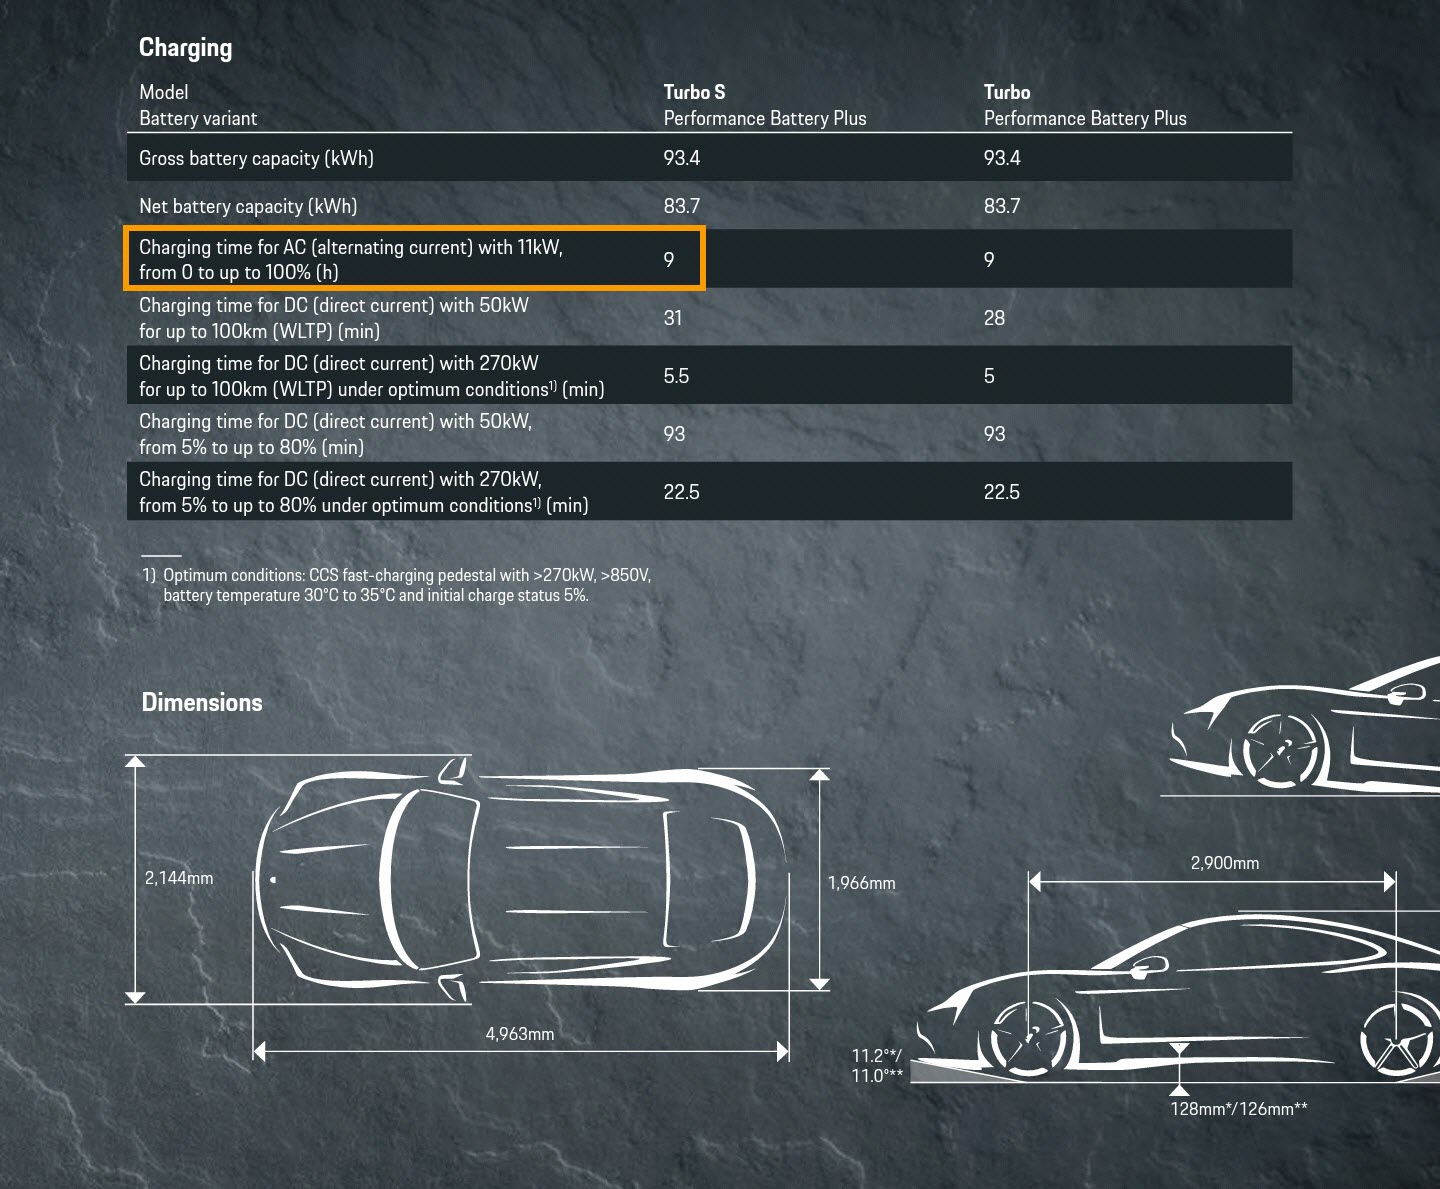 Porsche Taycan Taycan not suitable for AC 3-phase charging? tempFileForShare_20190915-162123